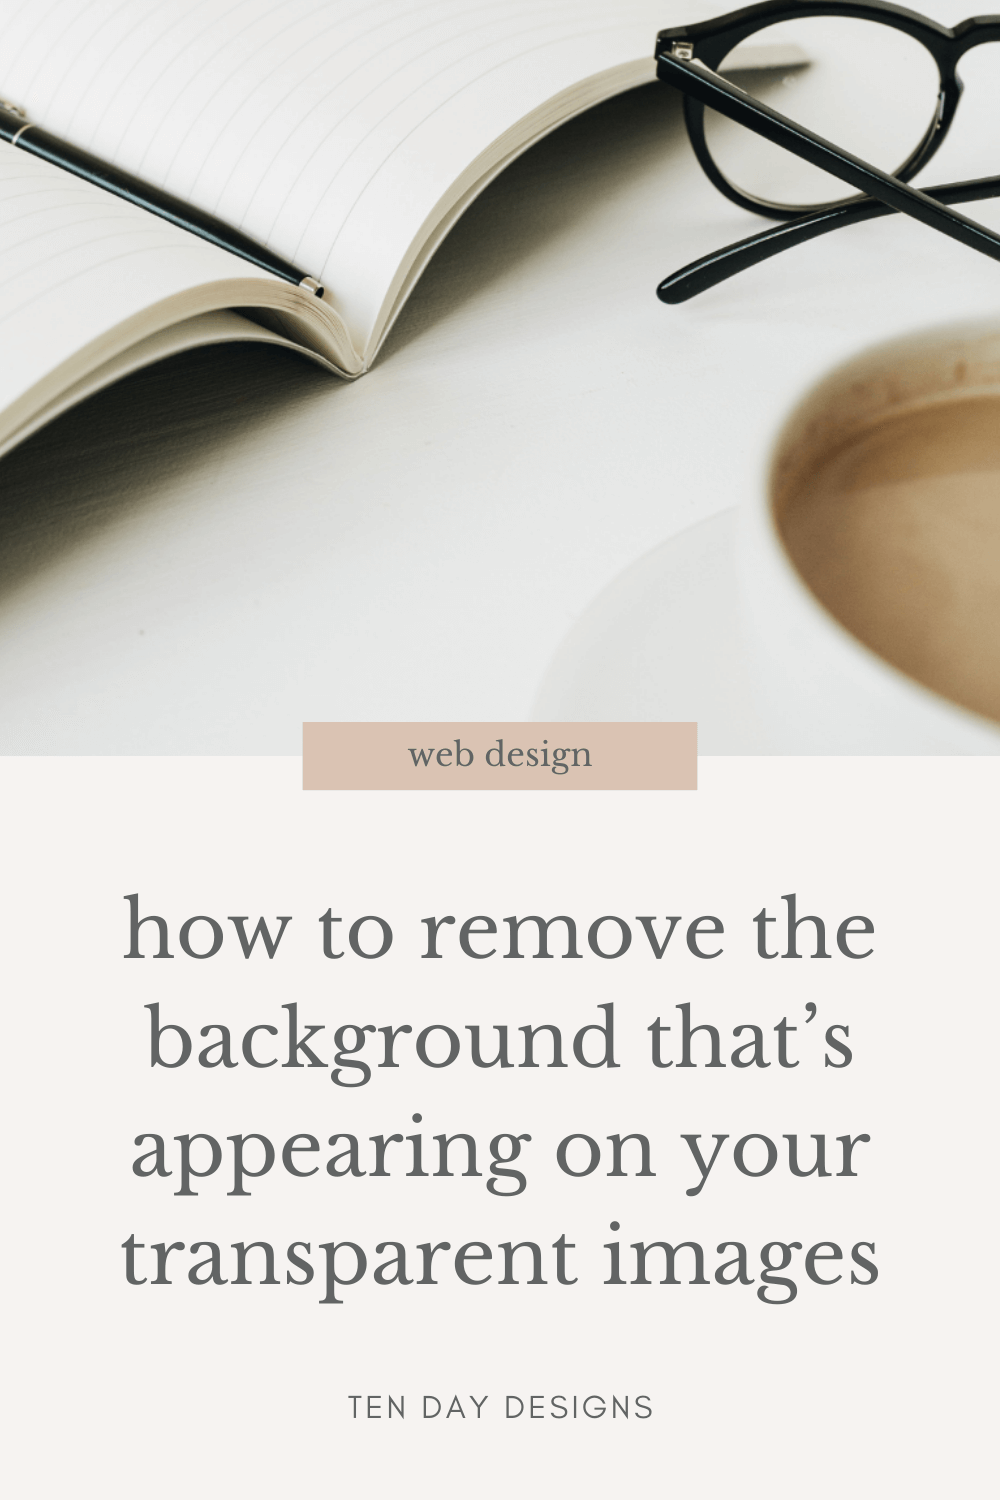 How To Remove The Background That's Appearing On Your Transparent Images —  Ten Day Designs // Squarespace Web Design